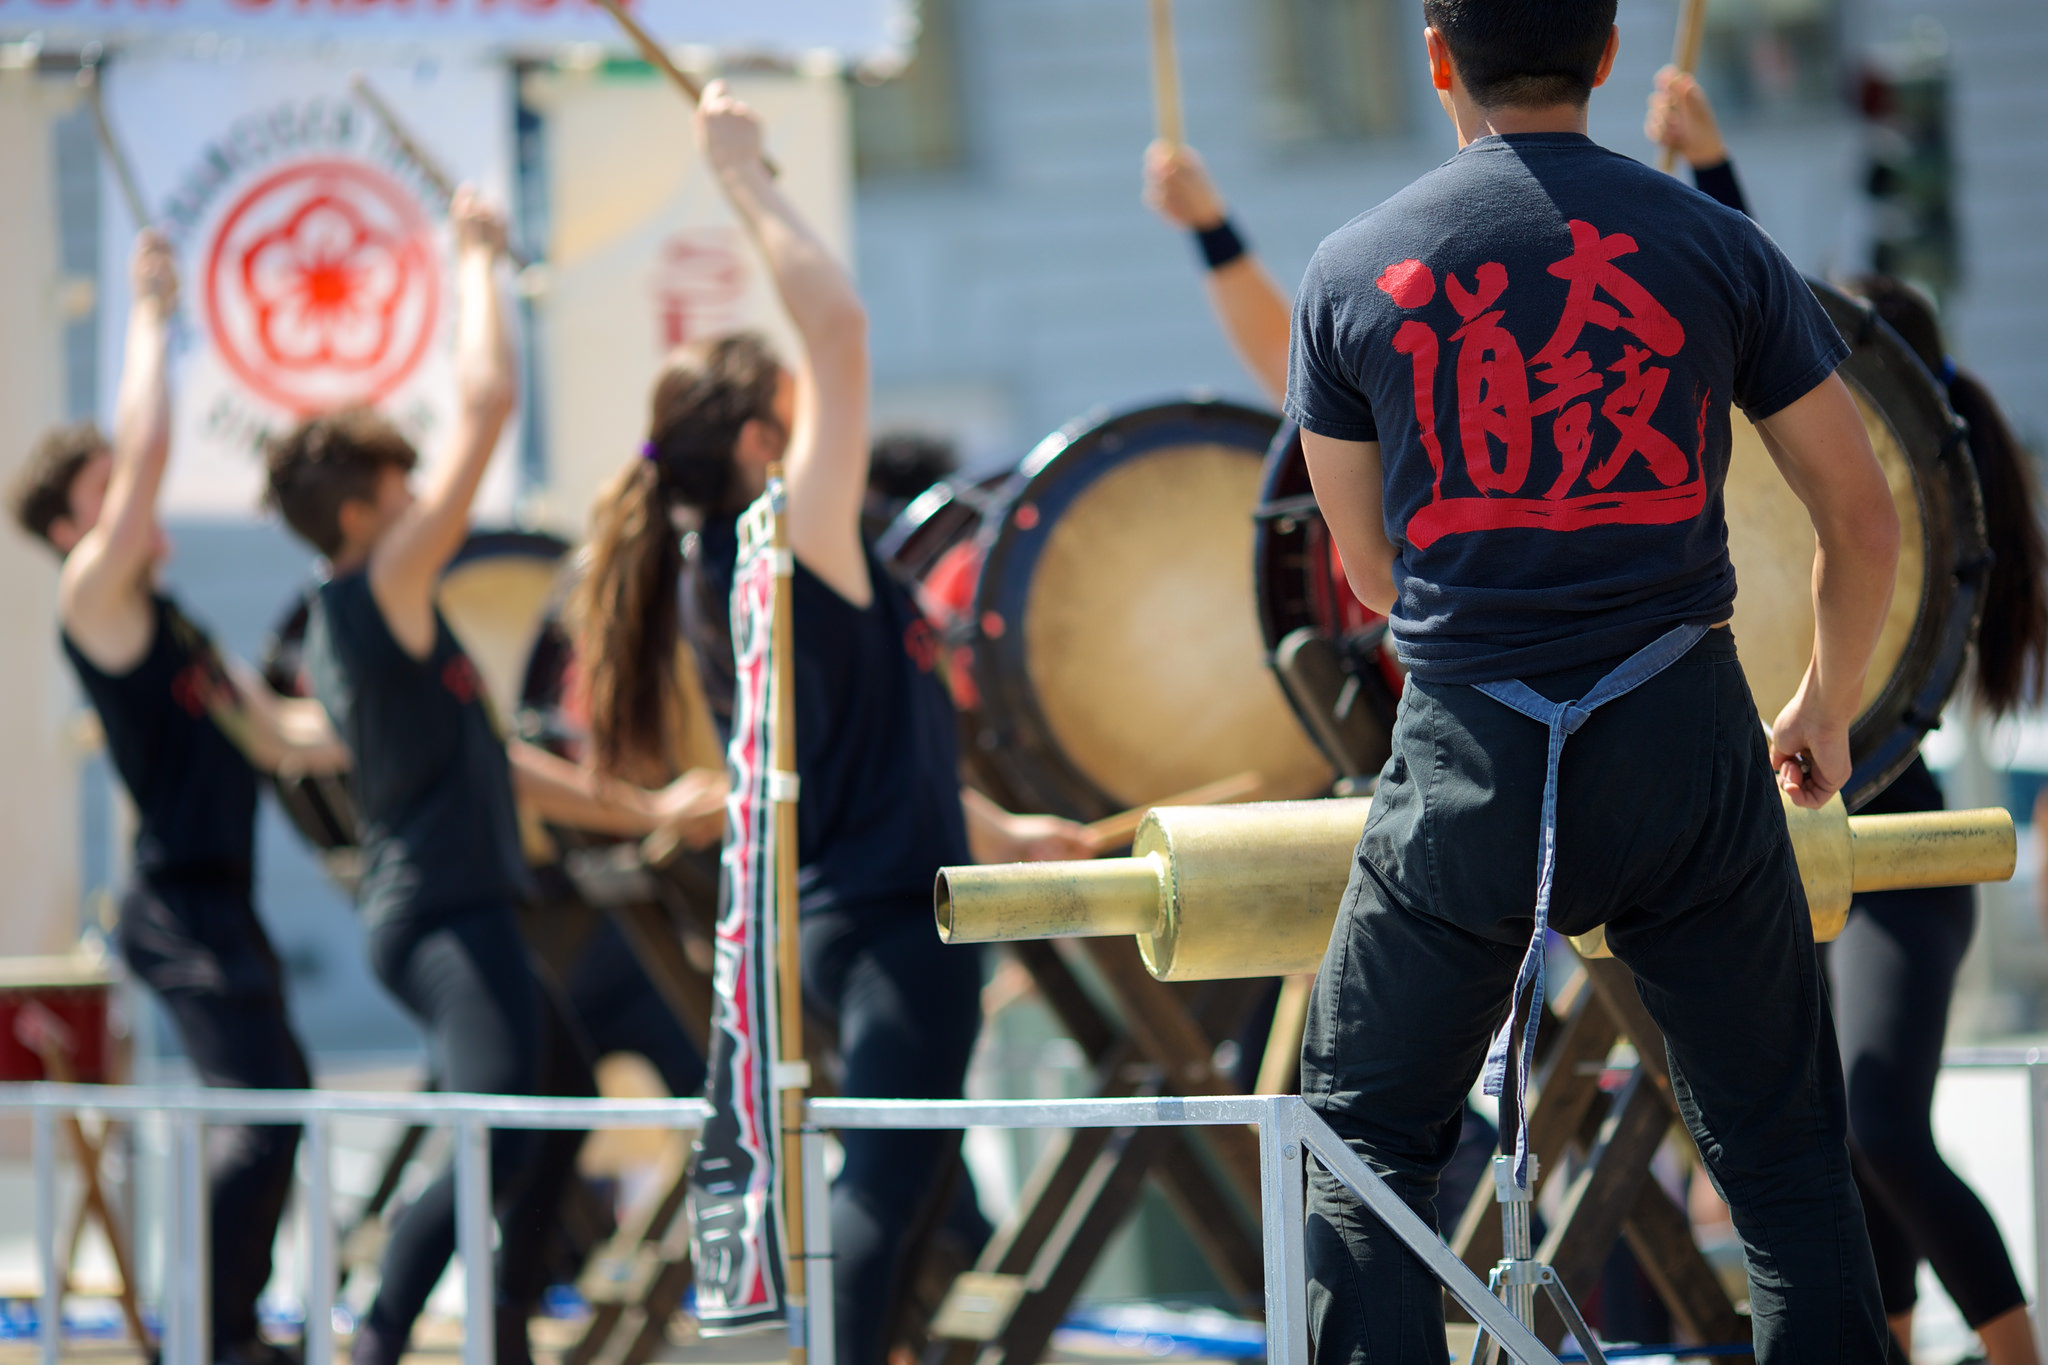 Taiko drummers perform in black t-shirts with red lettering at the 2014 Cherry Blossom Festival.